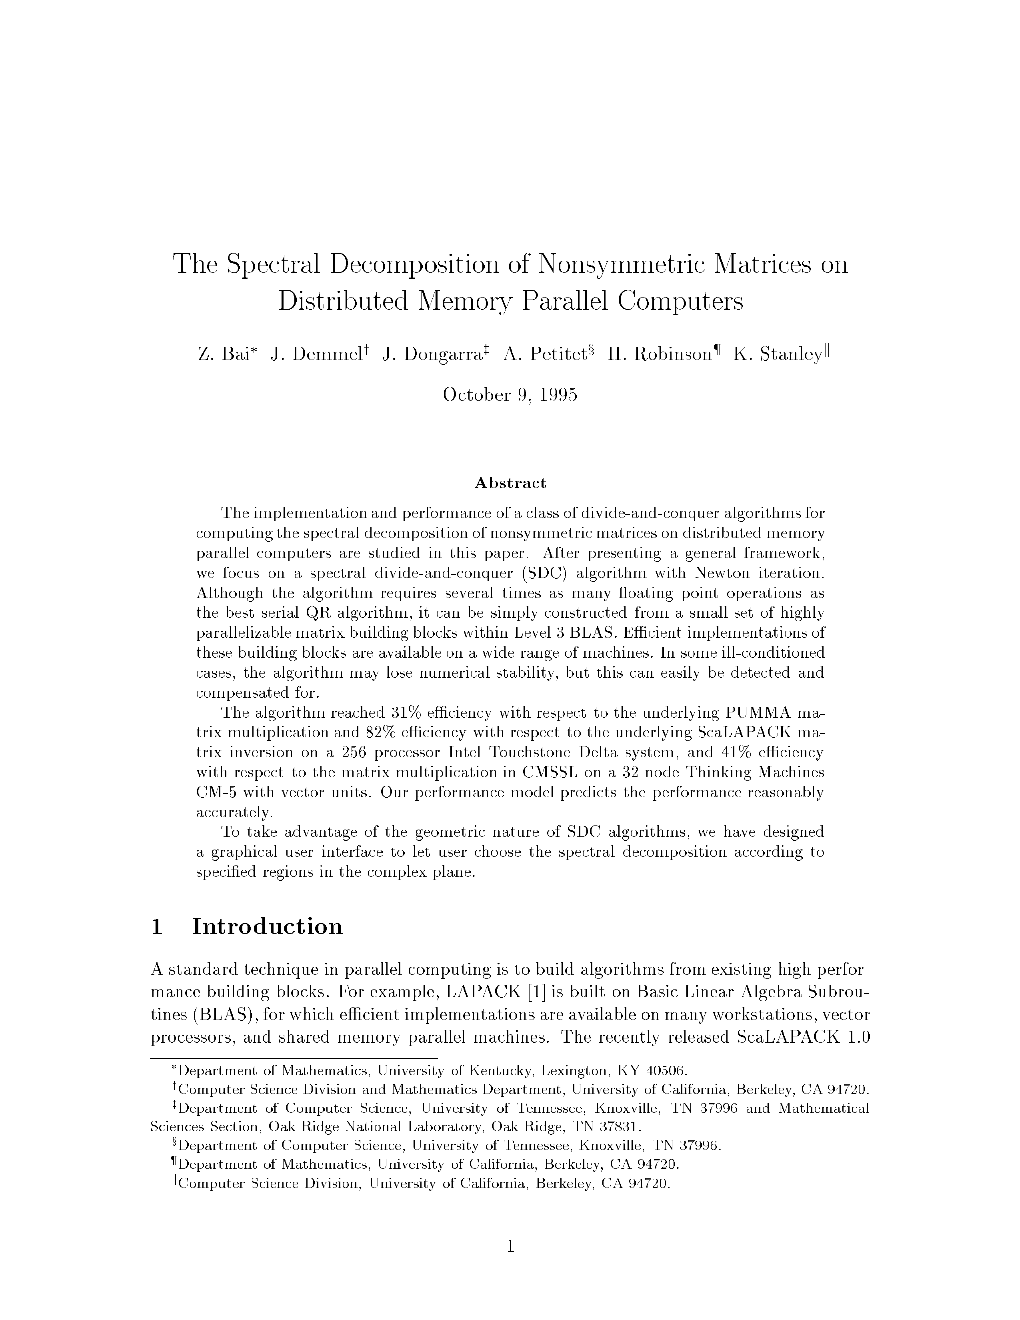 The Spectral Decomposition of Nonsymmetric Matrices On